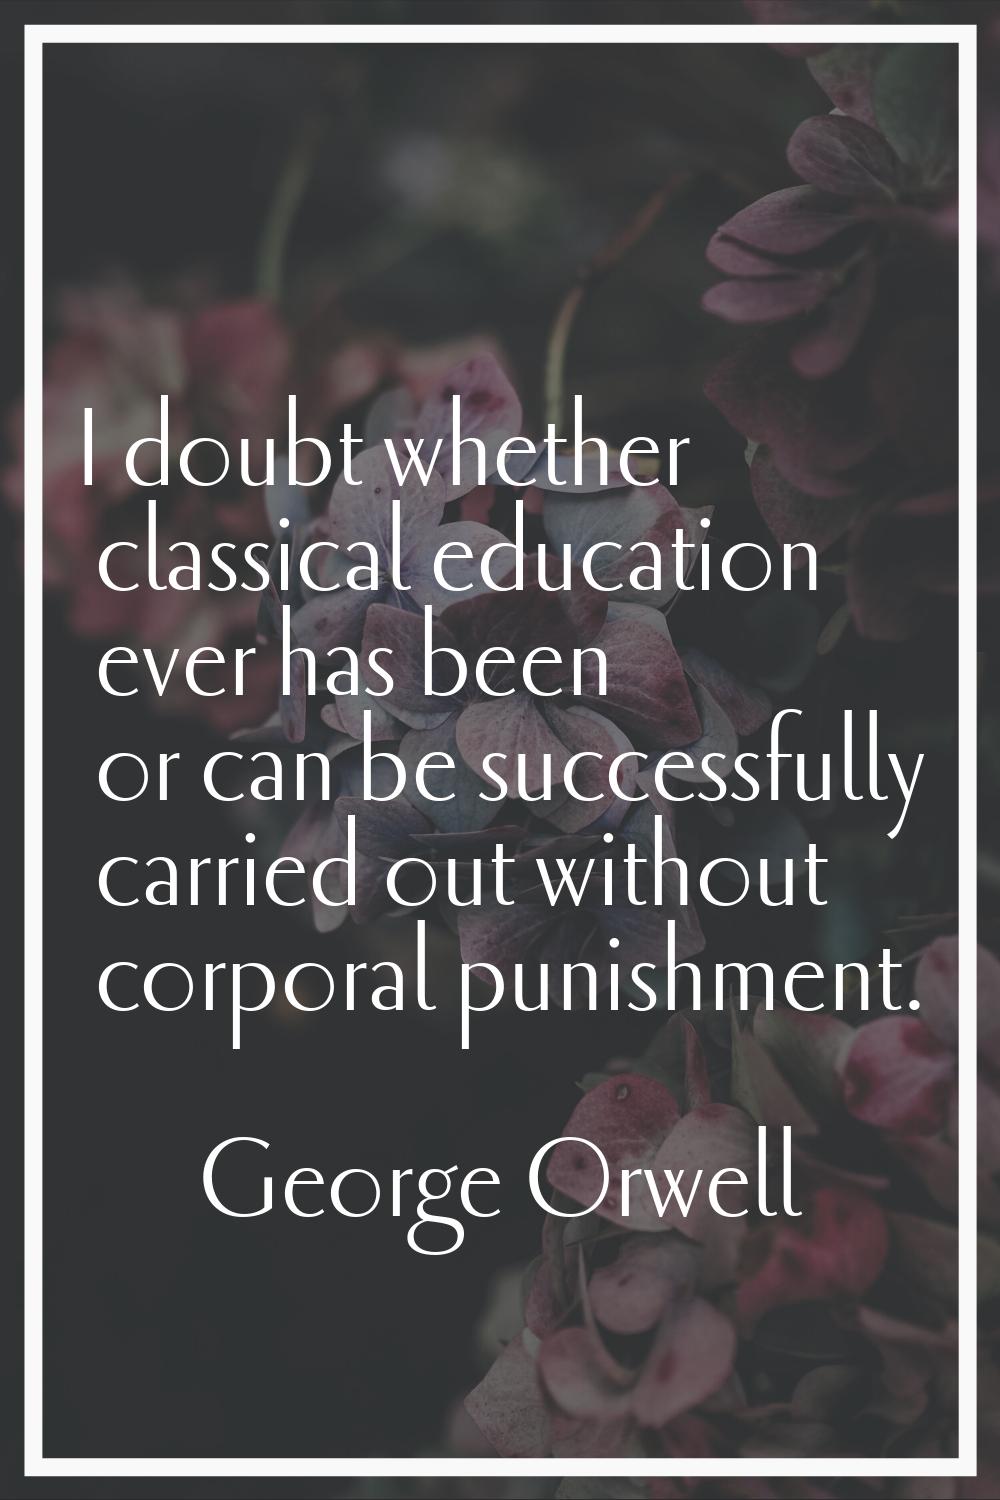 I doubt whether classical education ever has been or can be successfully carried out without corpor